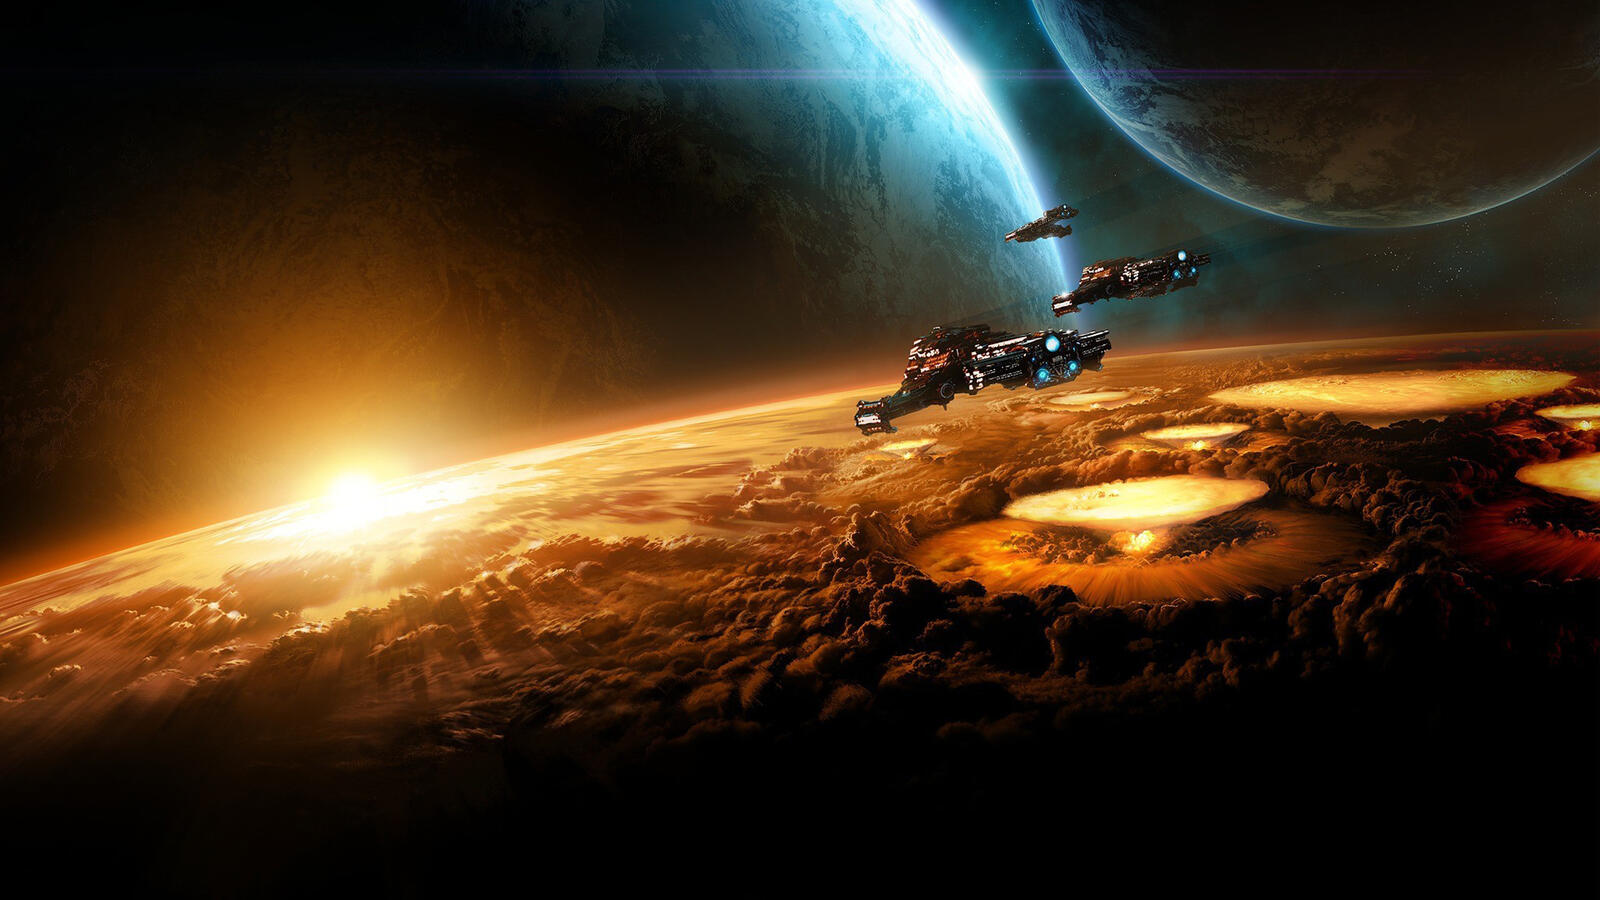 Wallpapers Space ships planets explosions on the desktop